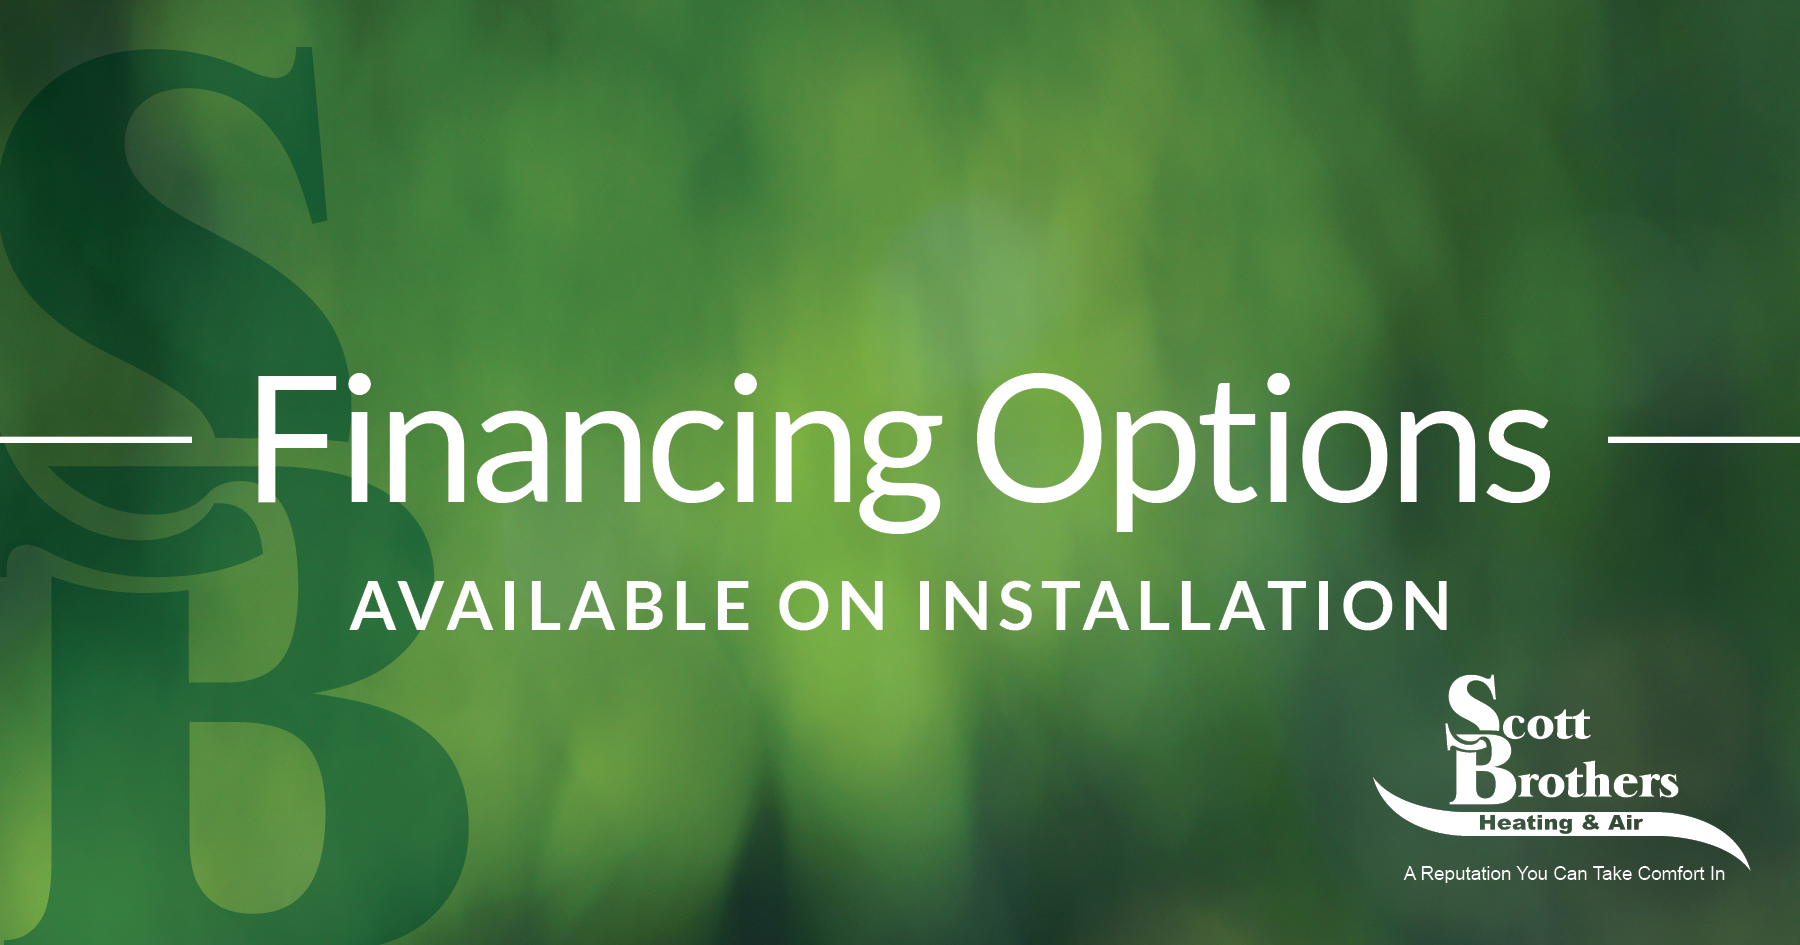 Financing options available on installation.